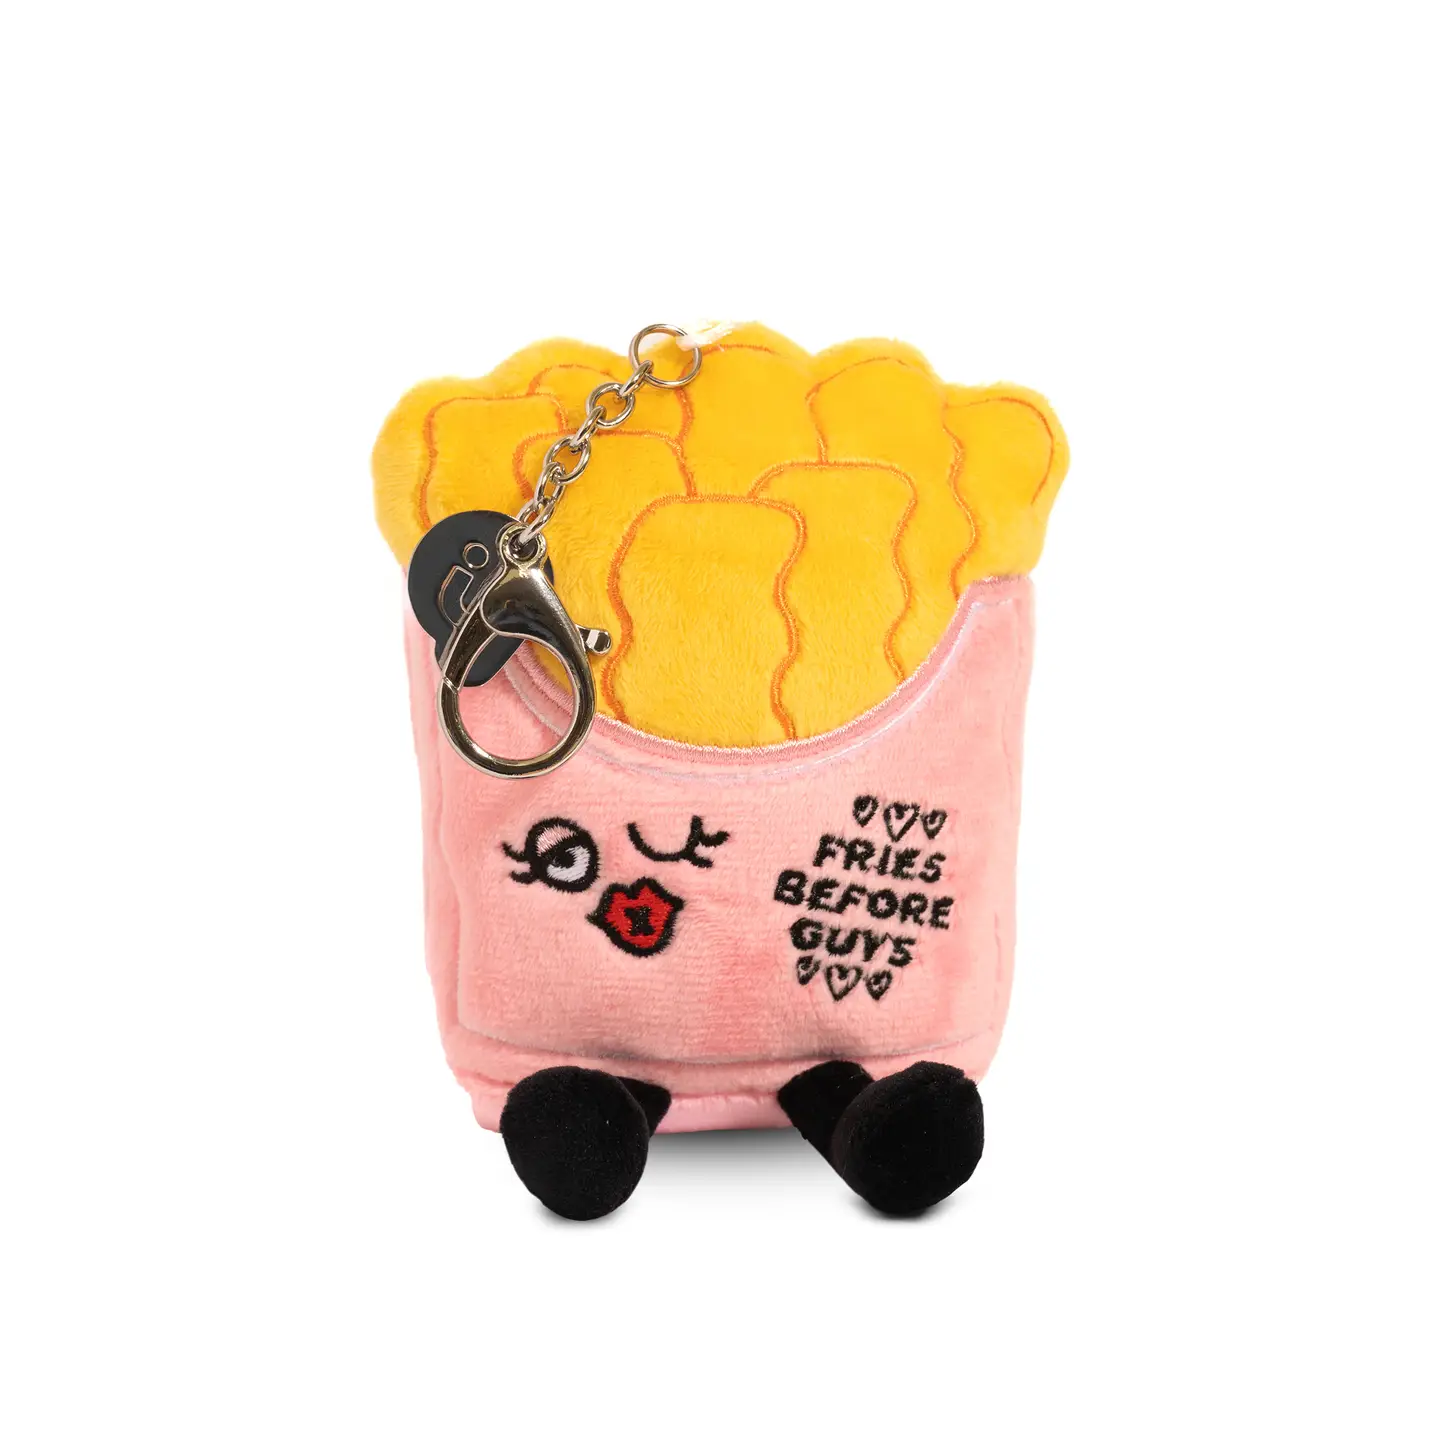 VSCO girlies, you need this bag charm! Just think of how cute she’d be with your Stanley! Her kissy face and heart details make her simply adorable. Clip her to your purse or backpack for a bite-size dose of girl power.